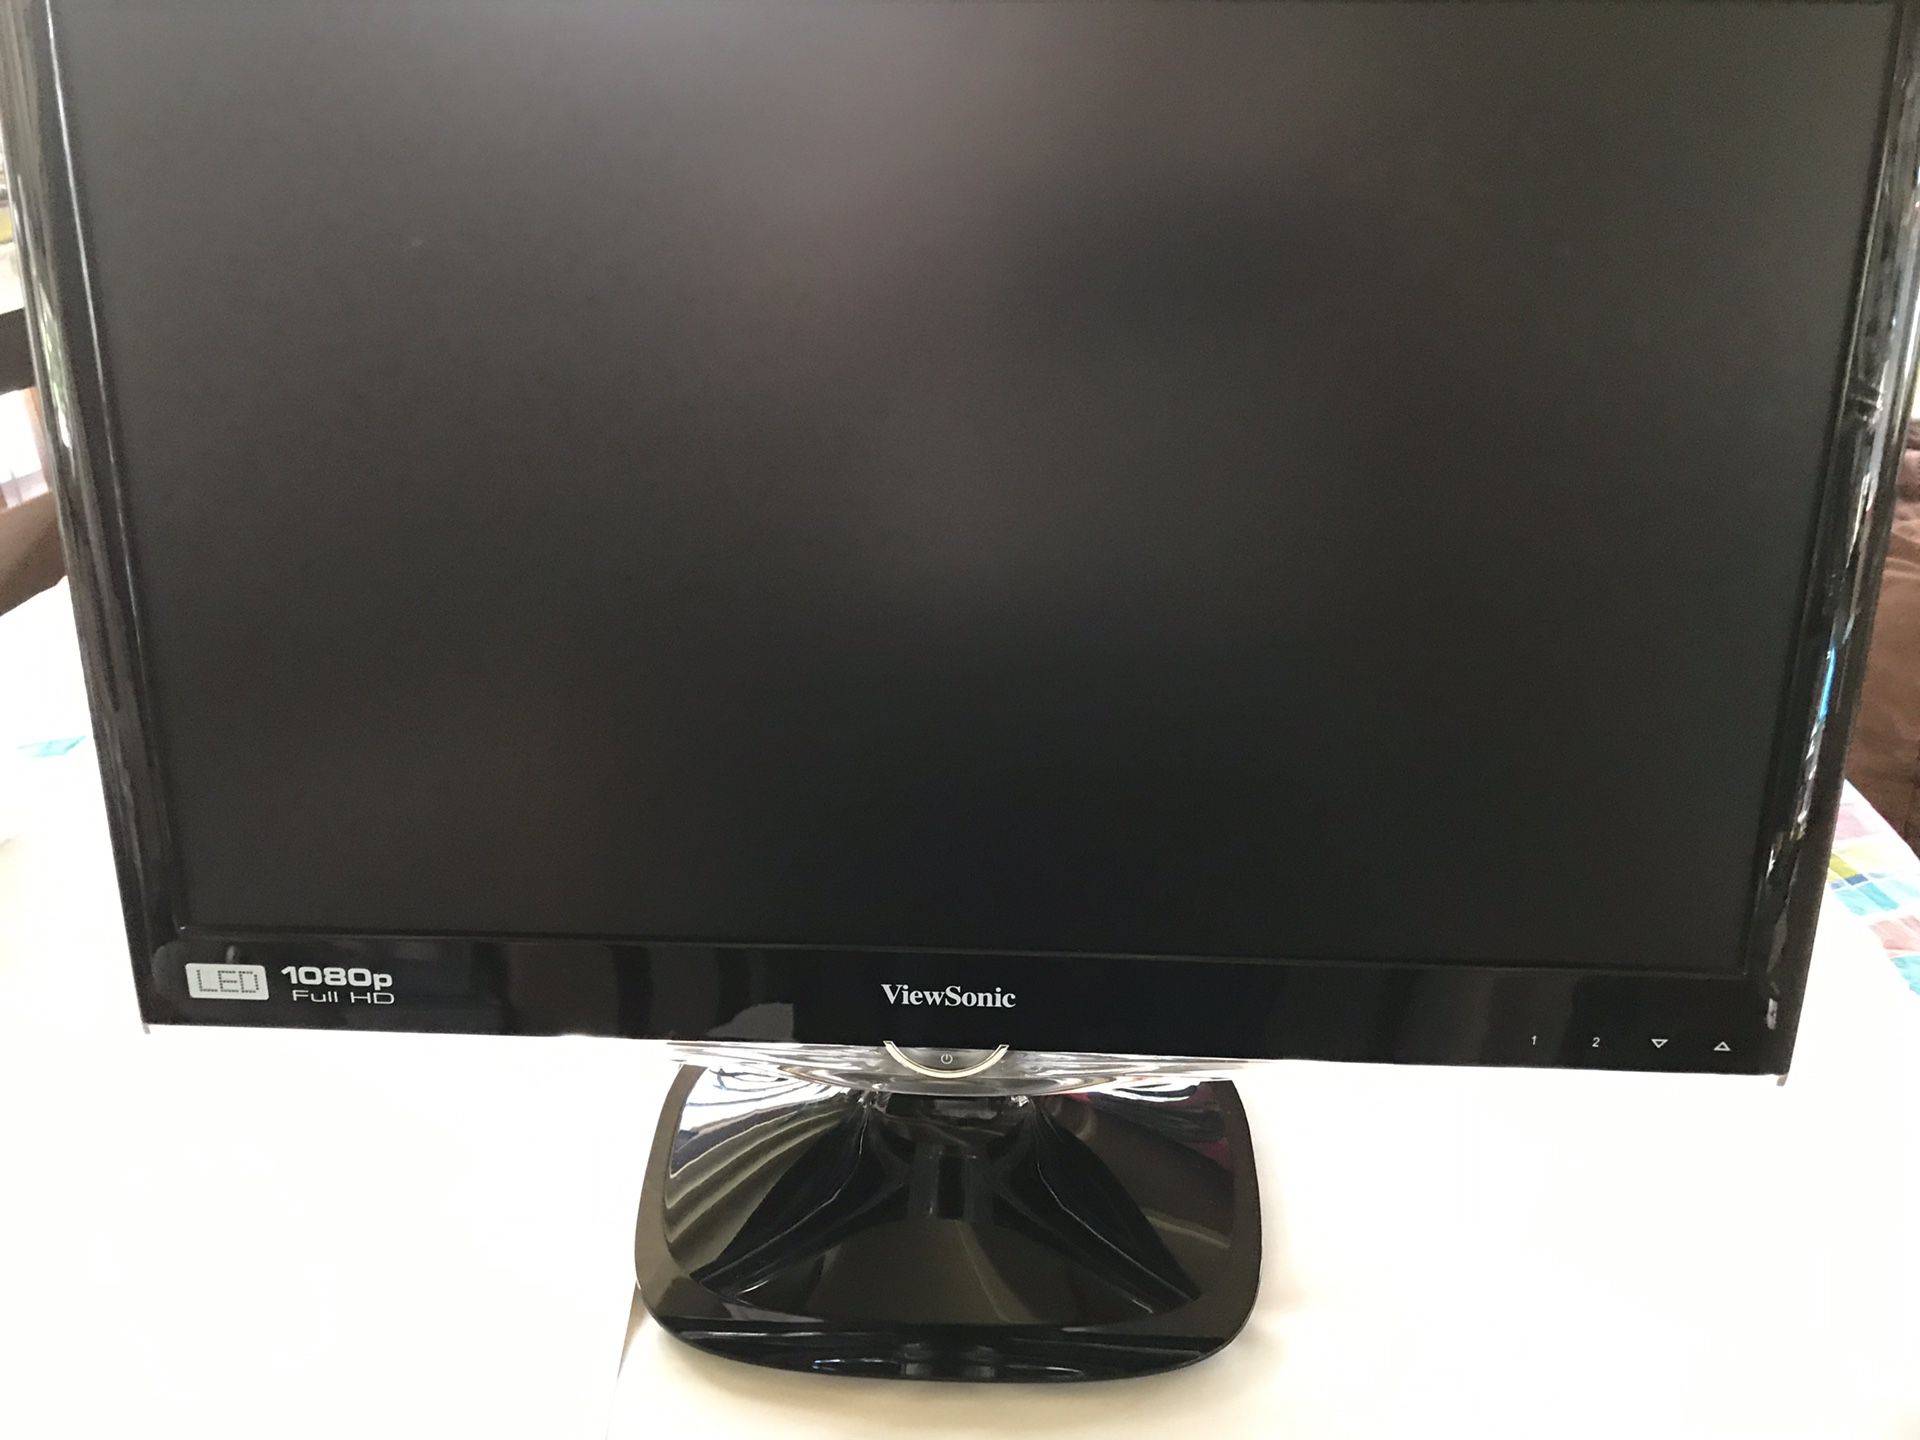 View sonic 21” LED monitor